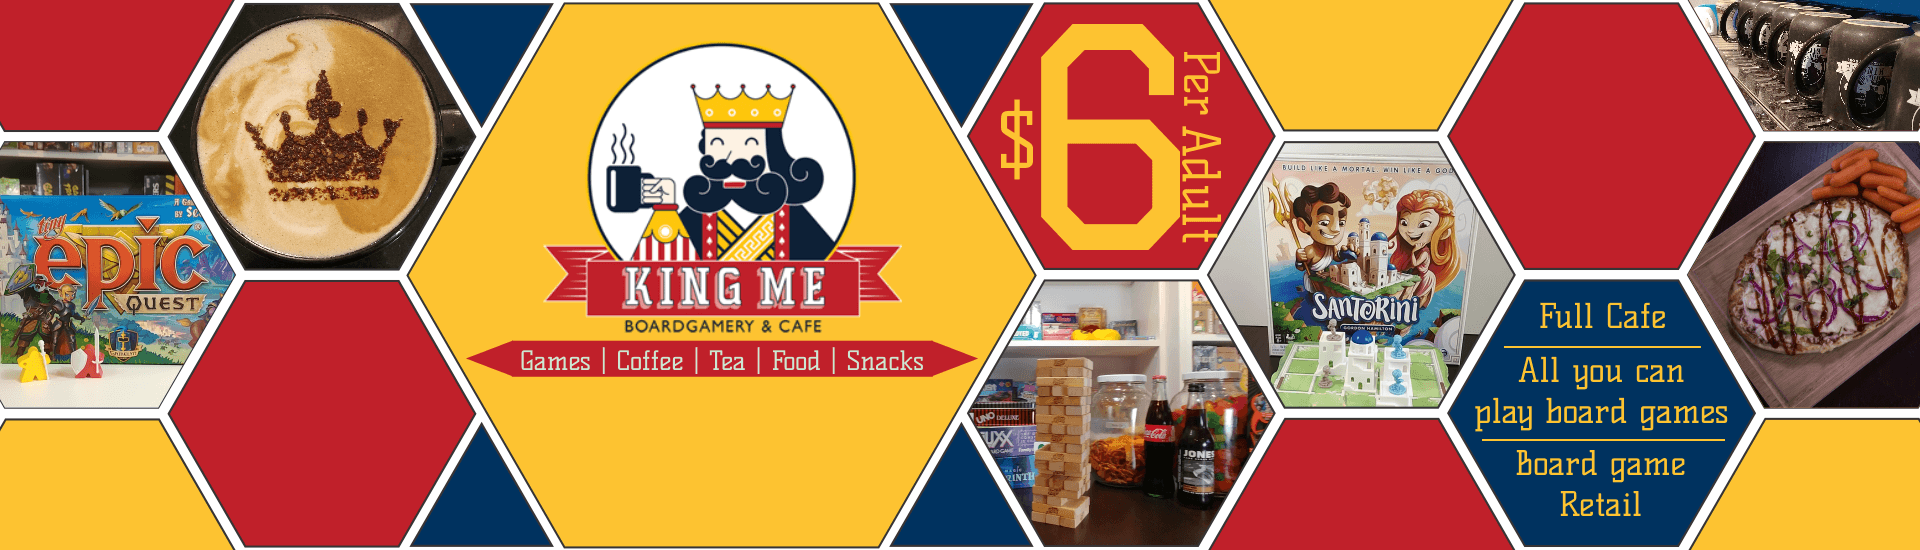 Red and Yellow Cafe Logo - King Me Boardgamery and Cafe | Saskatoon